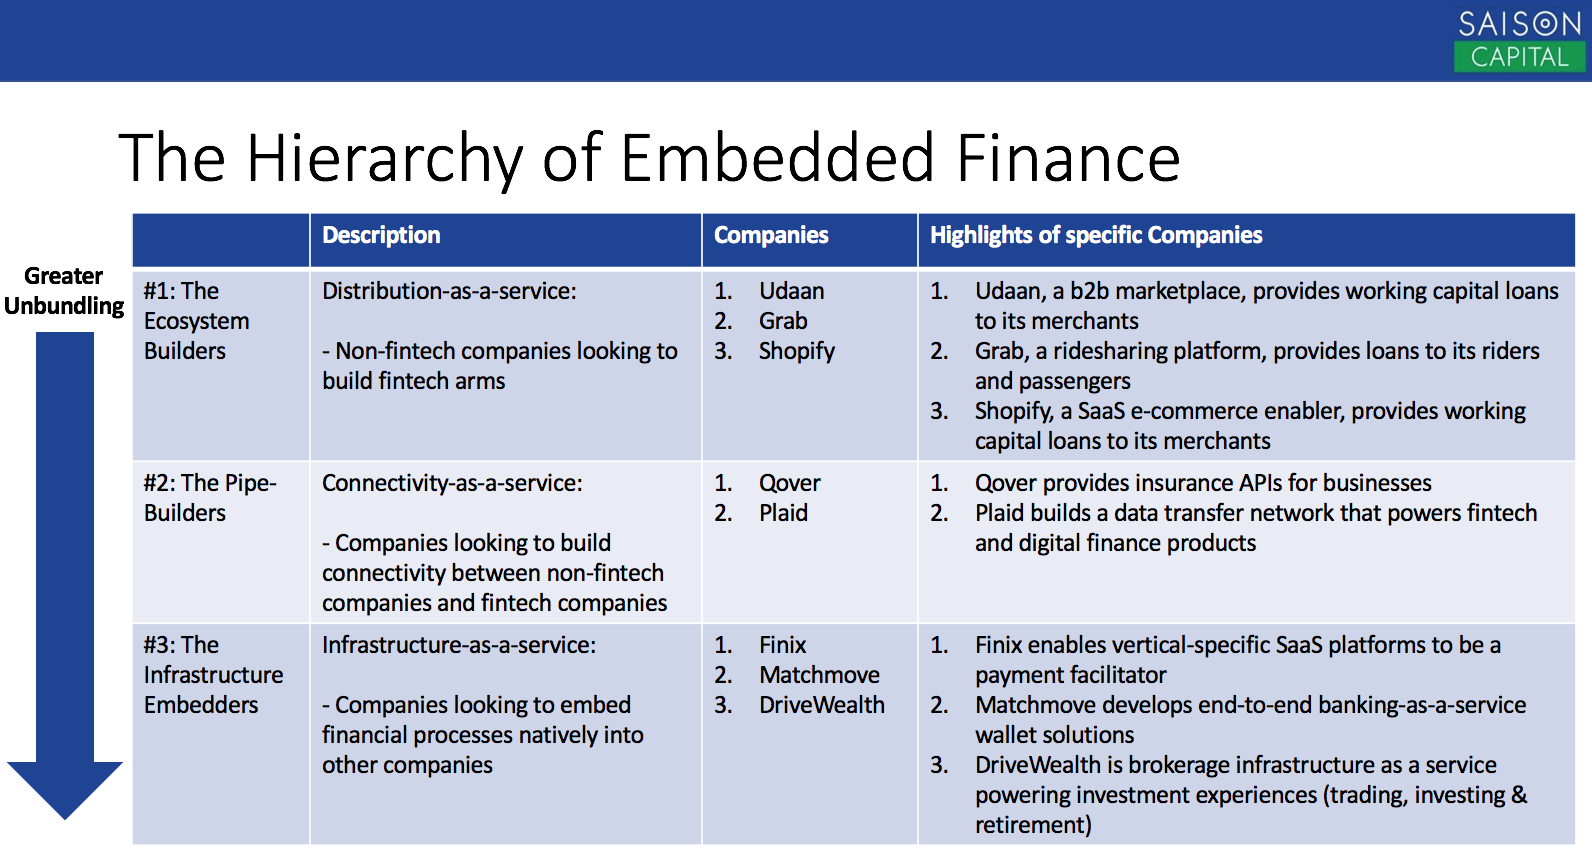 The rise of embedded finance companies